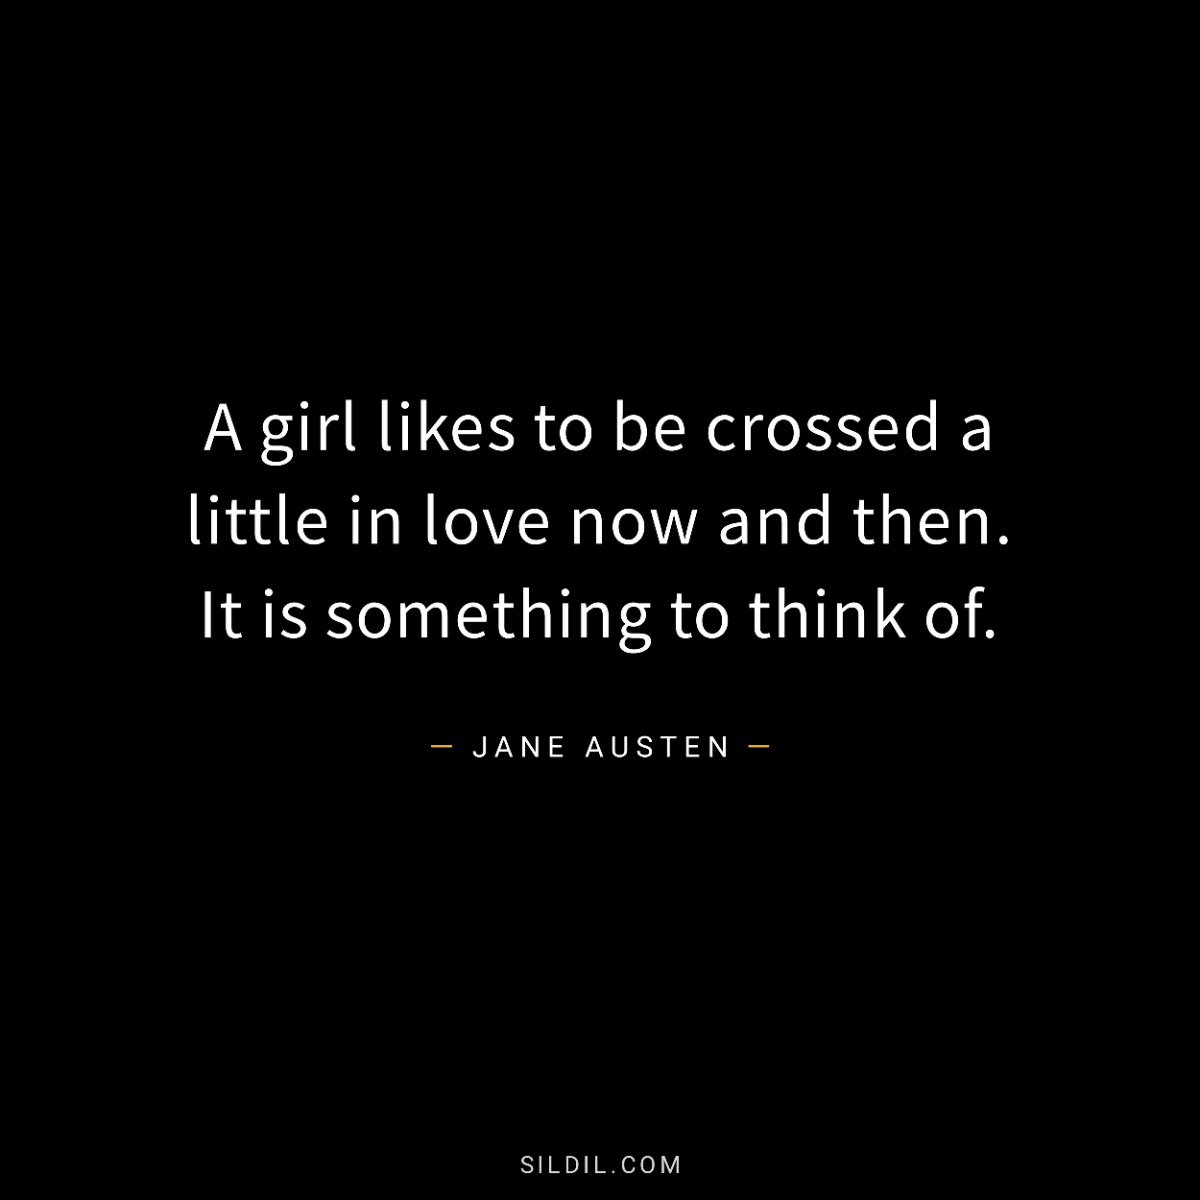 A girl likes to be crossed a little in love now and then. It is something to think of.